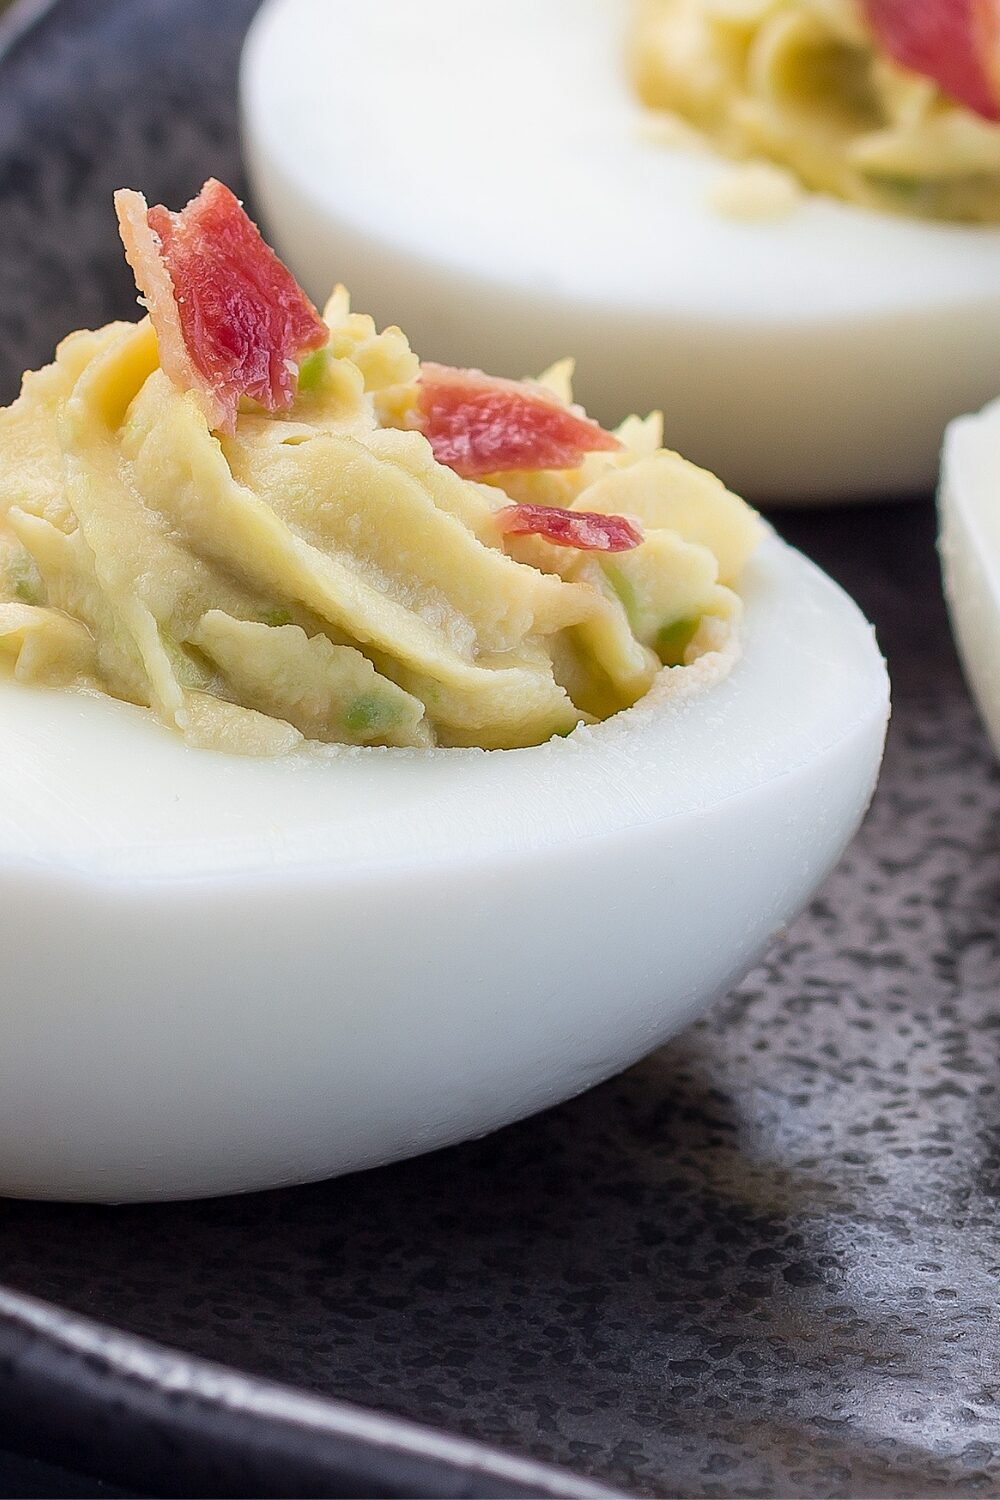 Closeup shot of avocado bacon deviled eggs, highlighting the creamy avocado filling, topped with crispy bacon bits, inside halved egg whites, showcasing a delicious, keto-friendly twist on a classic appetizer